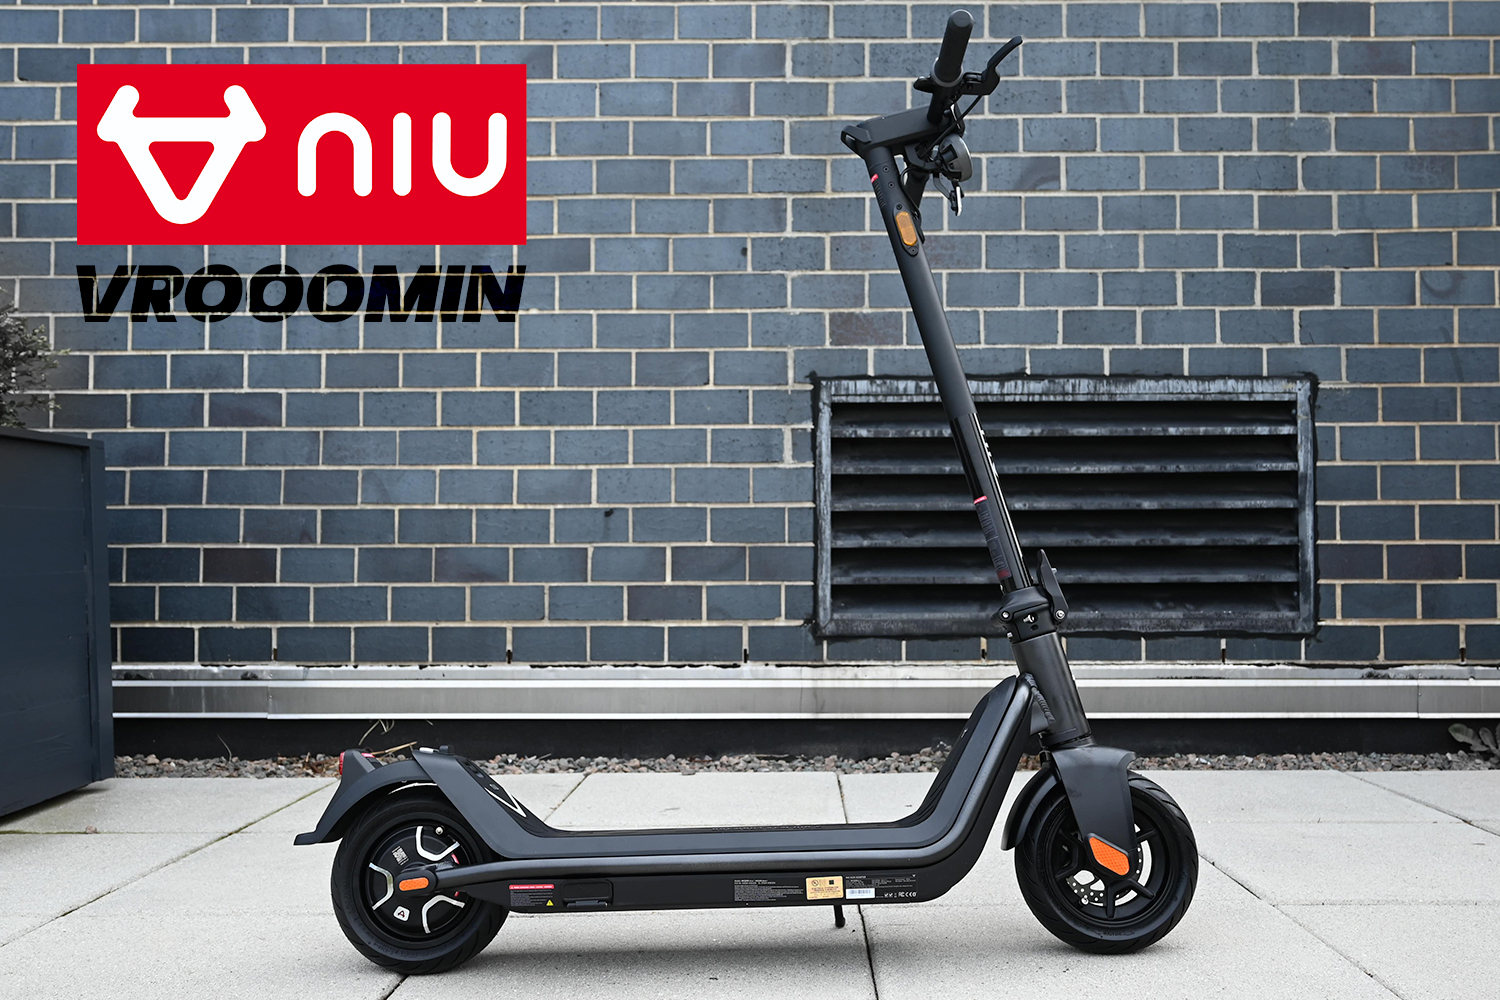 The Amazing NIU KQi3 Pro, Best 20 MPH Electric Scooter for NYC - VROOOMIN